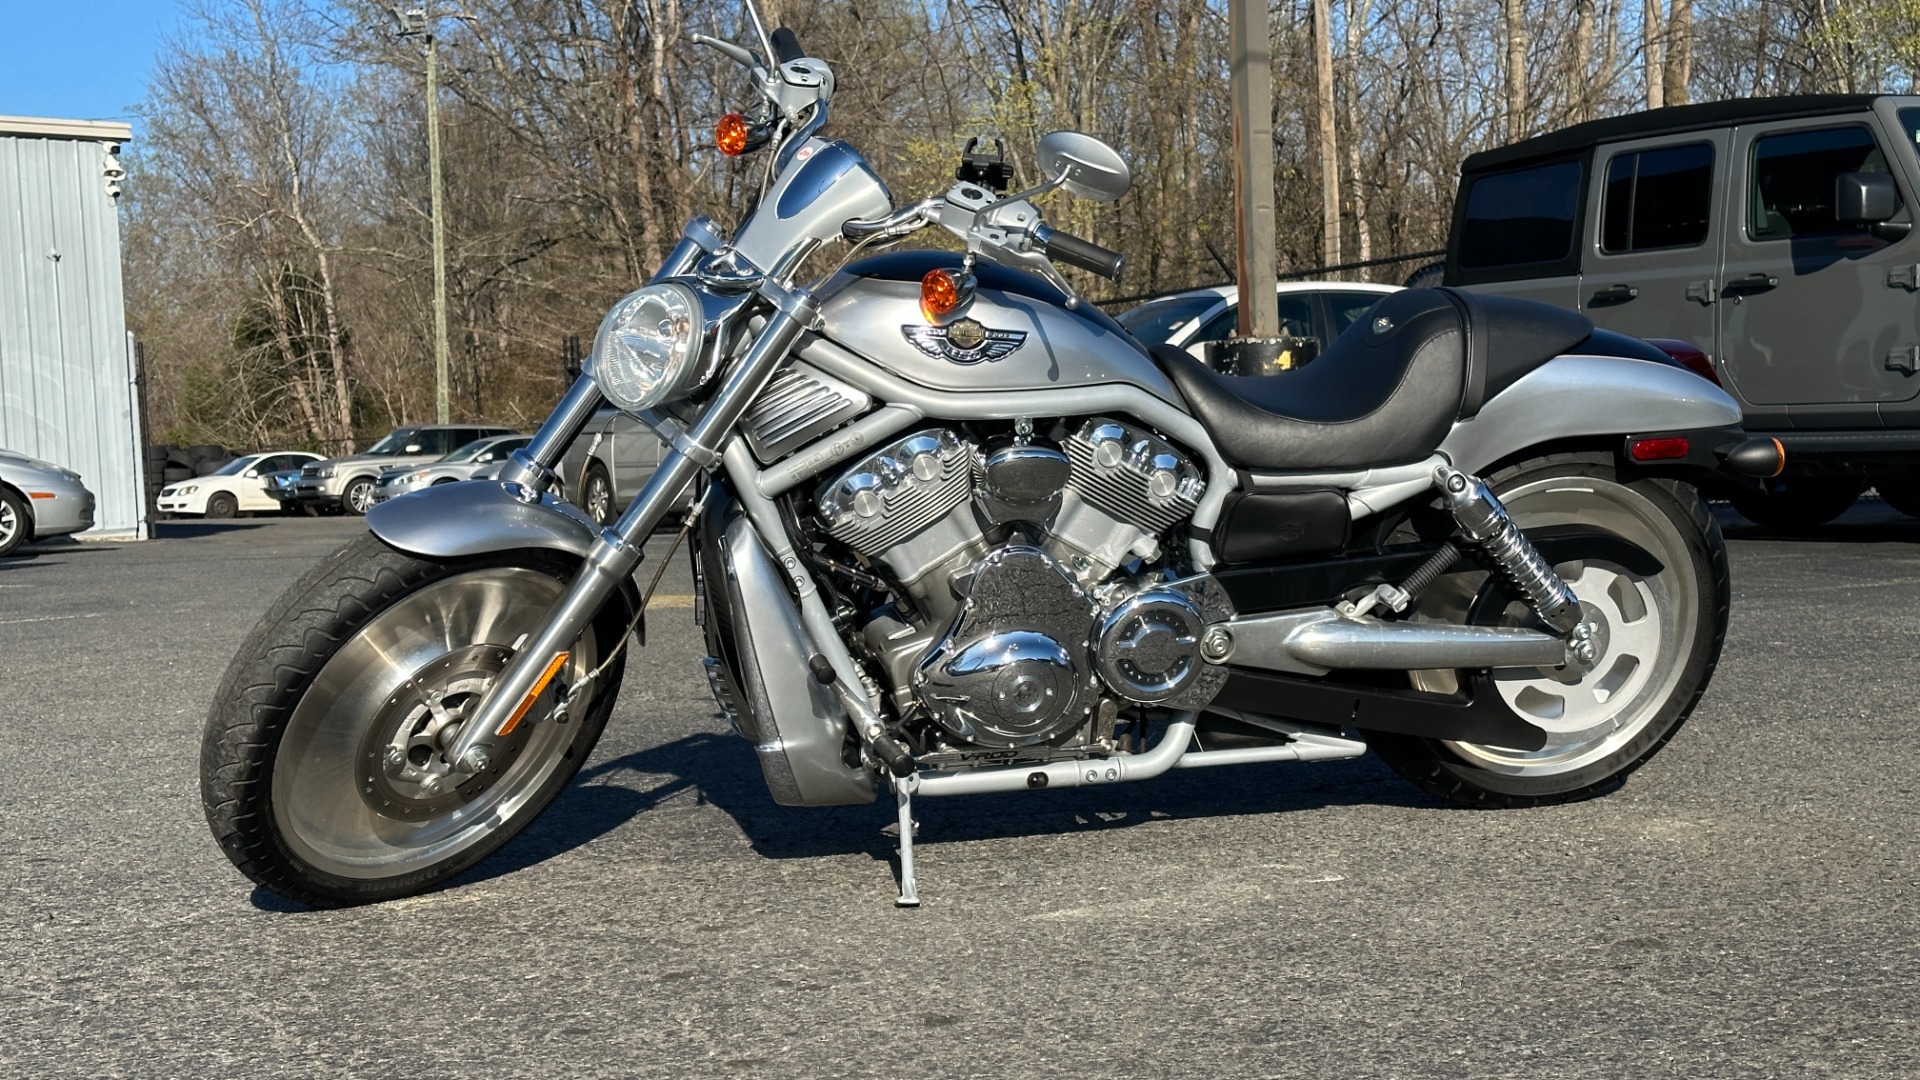 Used 2003 Harley Davidson V Rod ANNIVERSARY EDITION / 1130CC ENGINE / BREMBO BRAKES / VORTEX AIR SCOOPS for sale $7,995 at Formula Imports in Charlotte NC 28227 56